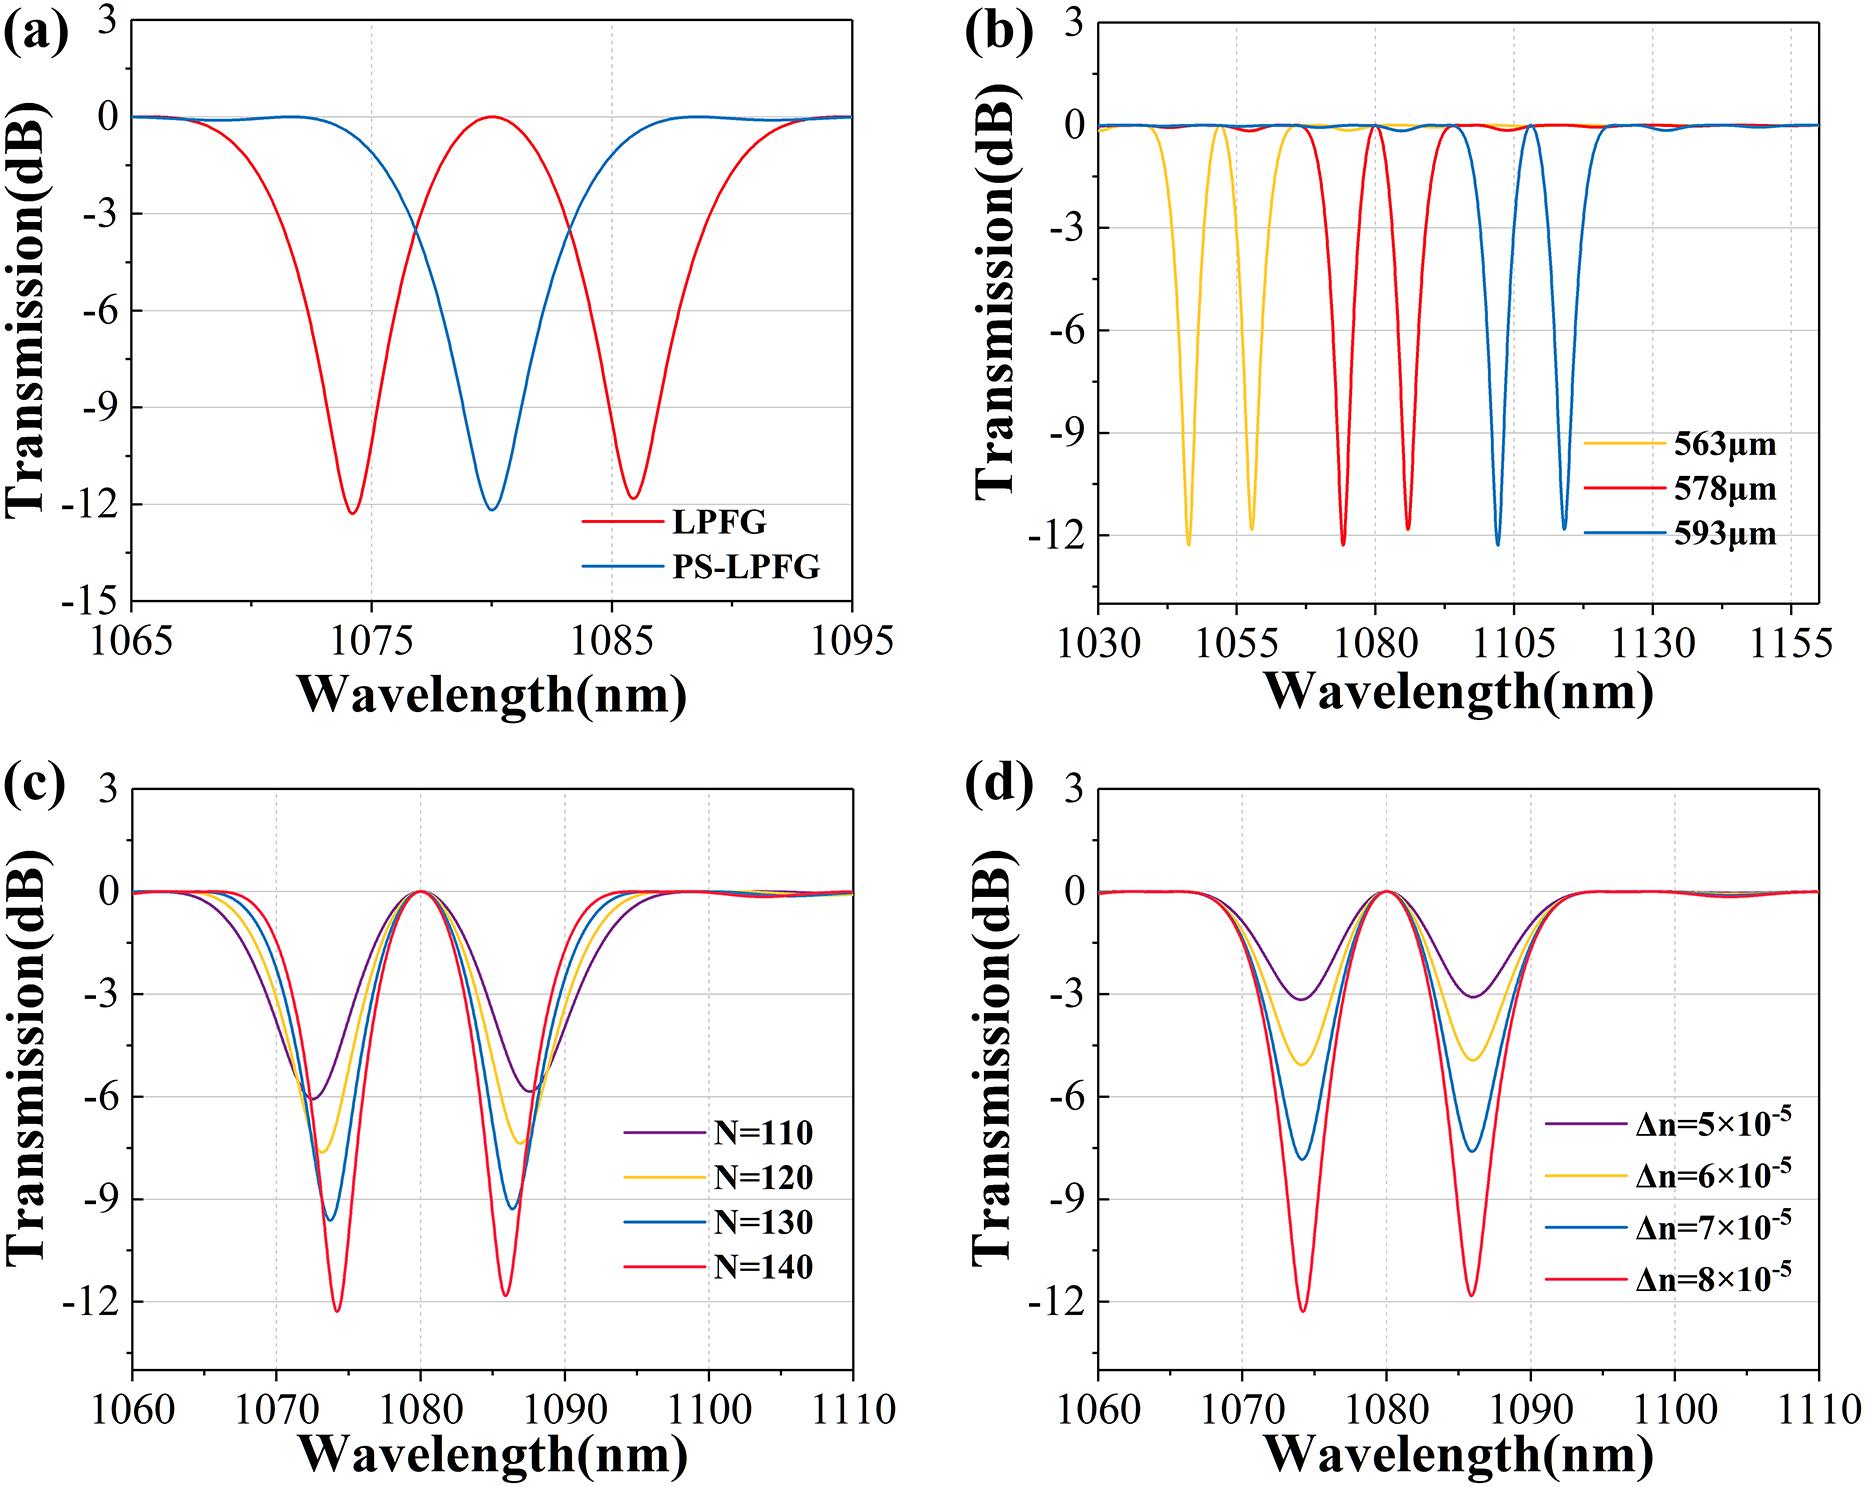 Simulated transmission spectrum of (a) LPFG and PS-LPFG with resonance wavelength 1080 nm at a period of 578 μm and a period number of 140; (b) PS-LPFGs with different periods at a period number of 140 and an index modulation amplitude of 8 × 10–5; (c) PS-LPFGs with different period numbers at a period of 578 μm and an index modulation amplitude of 8 × 10–5; and (d) PS-LPFGs with different index modulation amplitudes at a period of 578 μm and a period number of 140.